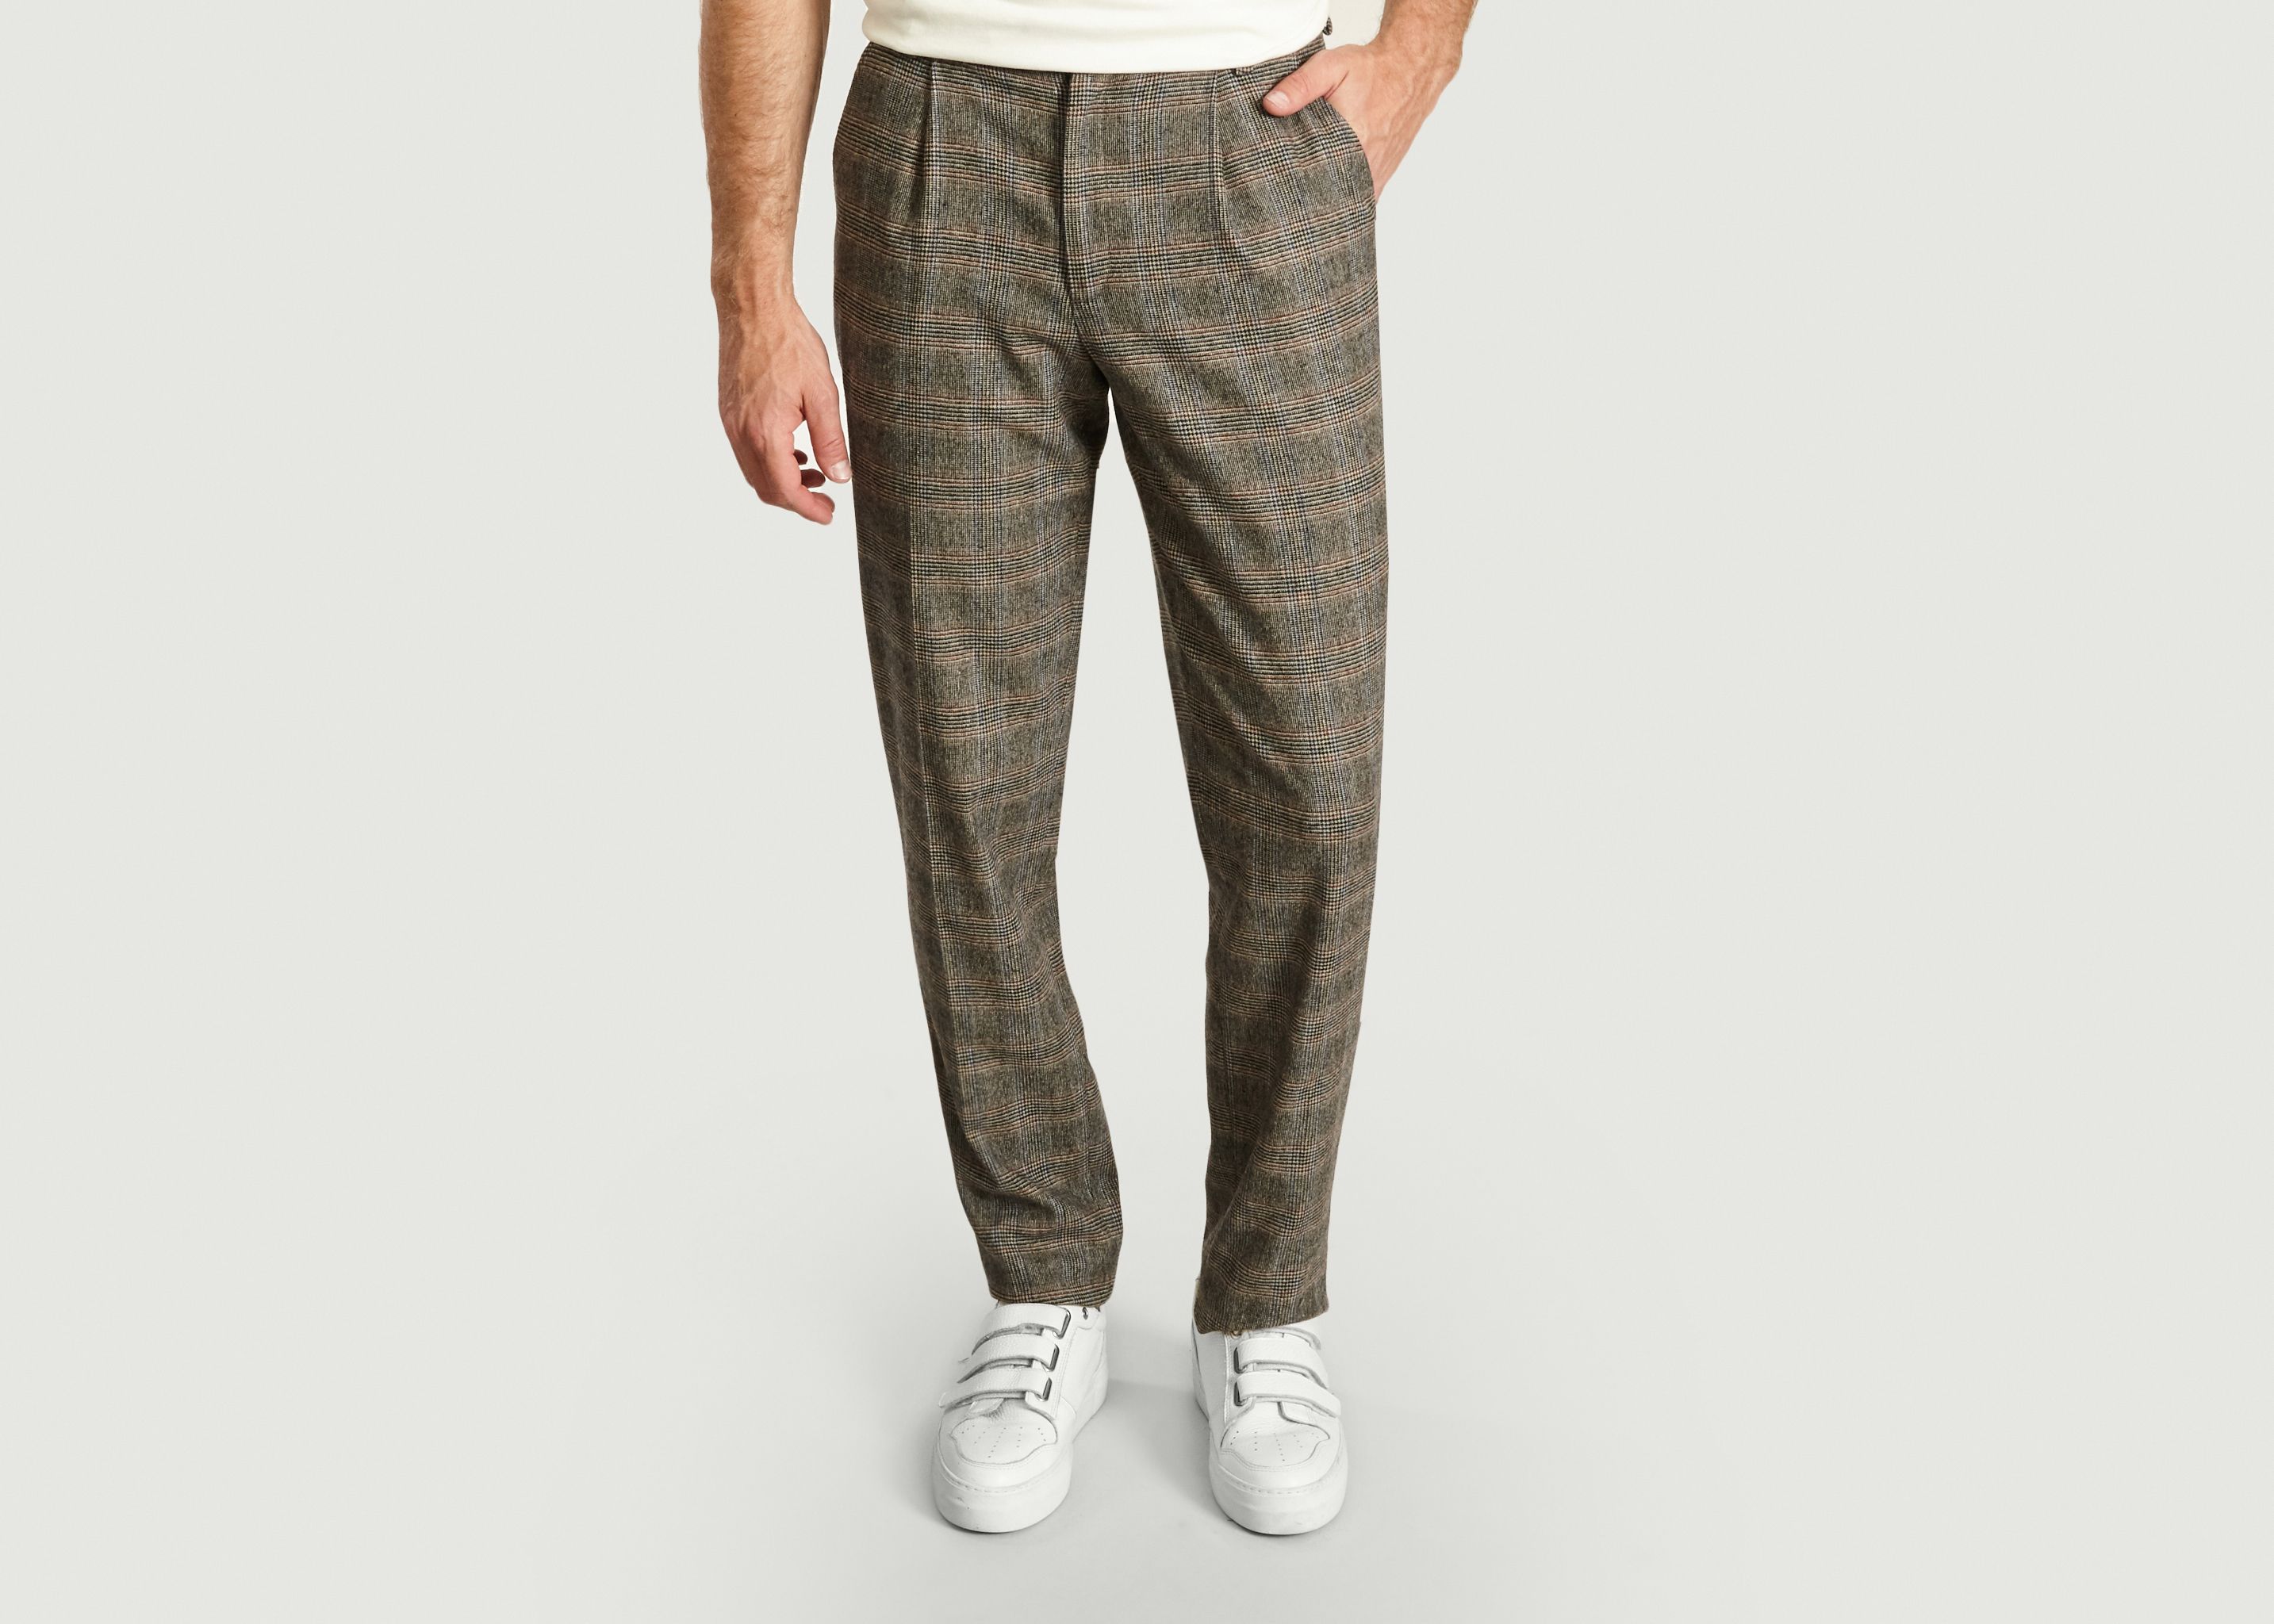 François Chequered Trousers - Editions M.R